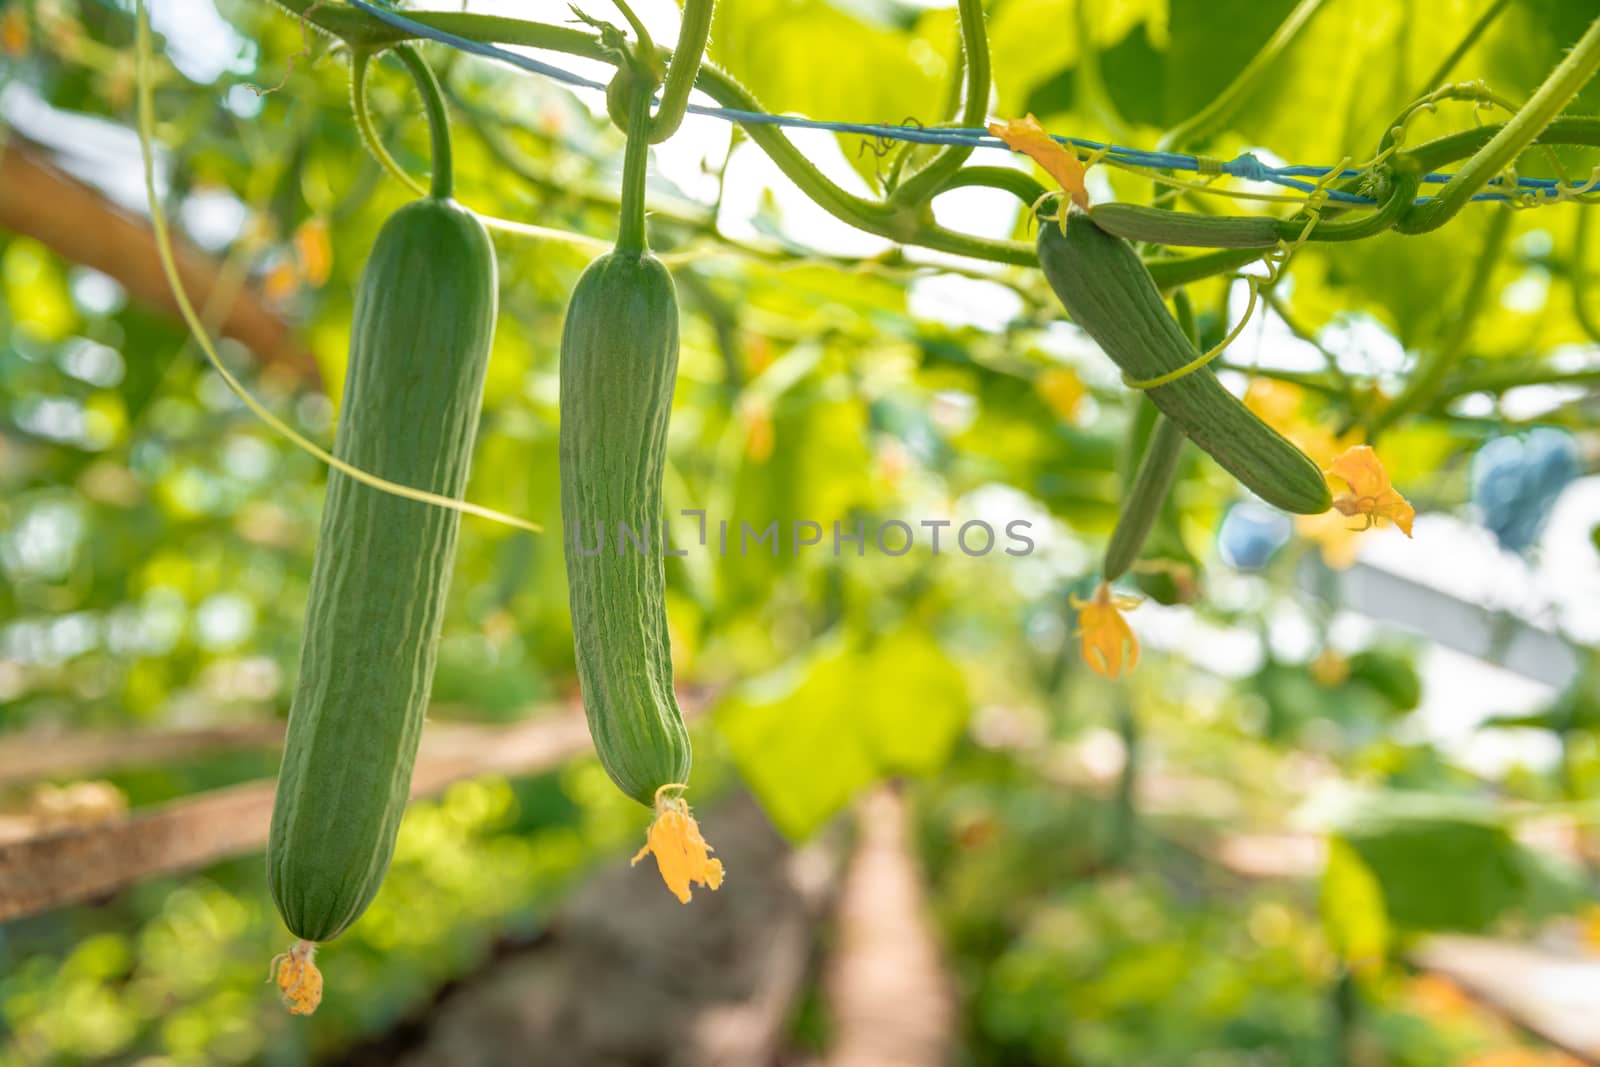 growing organic cucumbers without chemicals and pesticides in a greenhouse on the farm, healthy vegetables with vitamins.